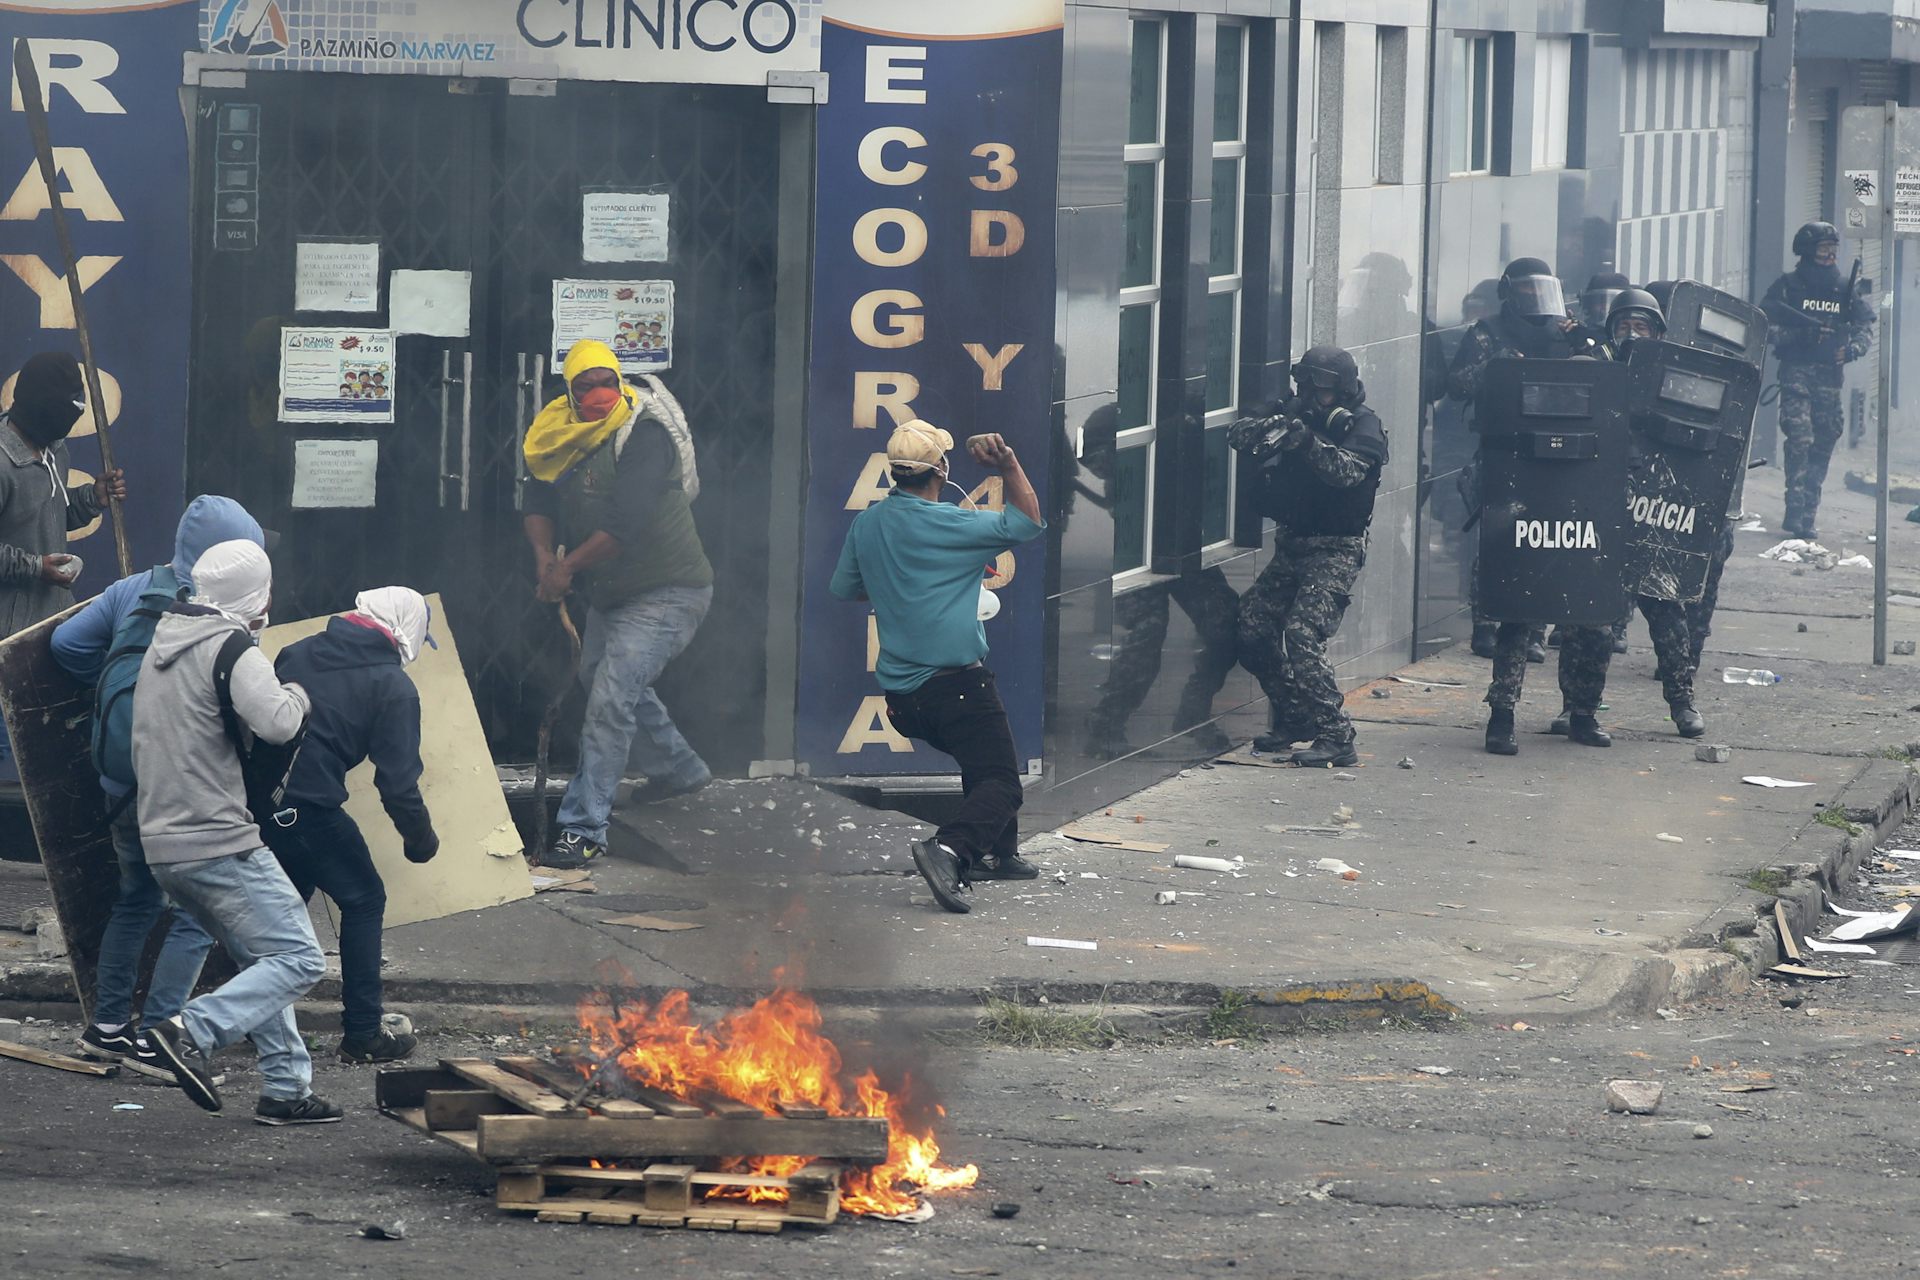 Unrest in Latin America Makes Authoritarianism Look More Appealing to Some